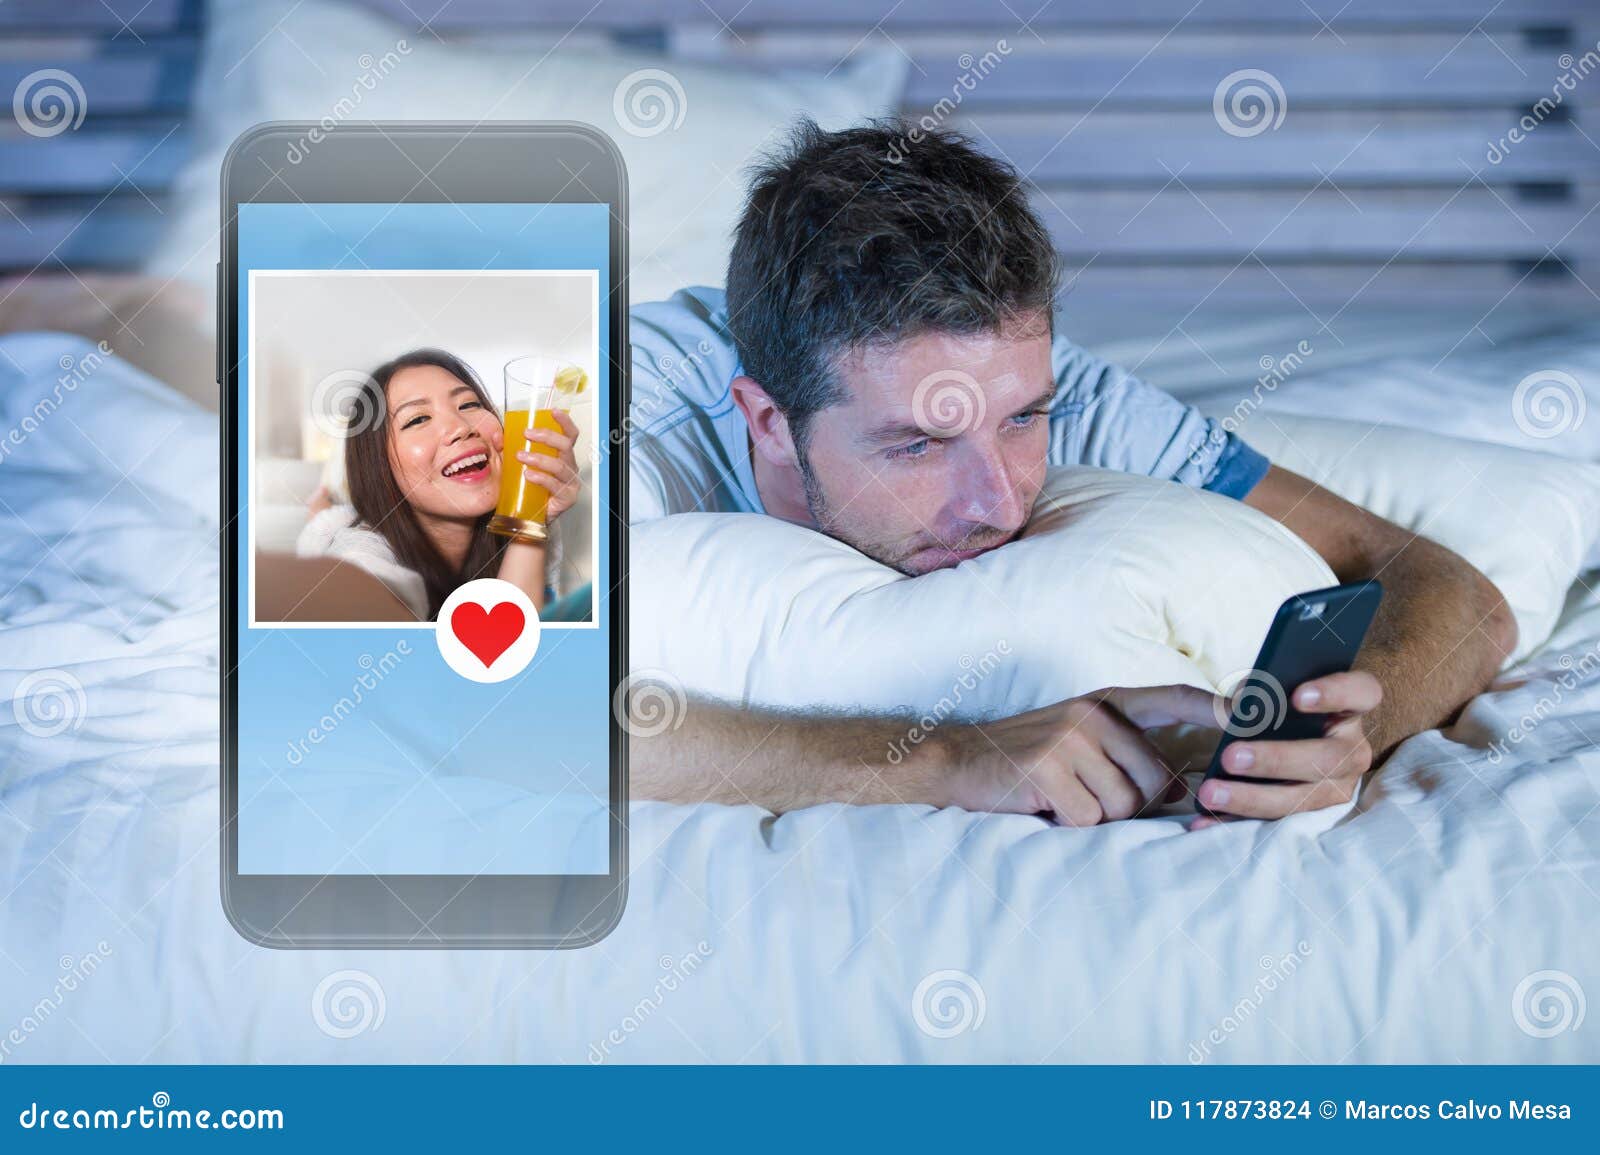 Young Attractive Man Lying in Bed on Line Searching for Sex or Love Finding a Beautiful Girl Profile Sending Like Using Mobile Pho Stock Photo photo